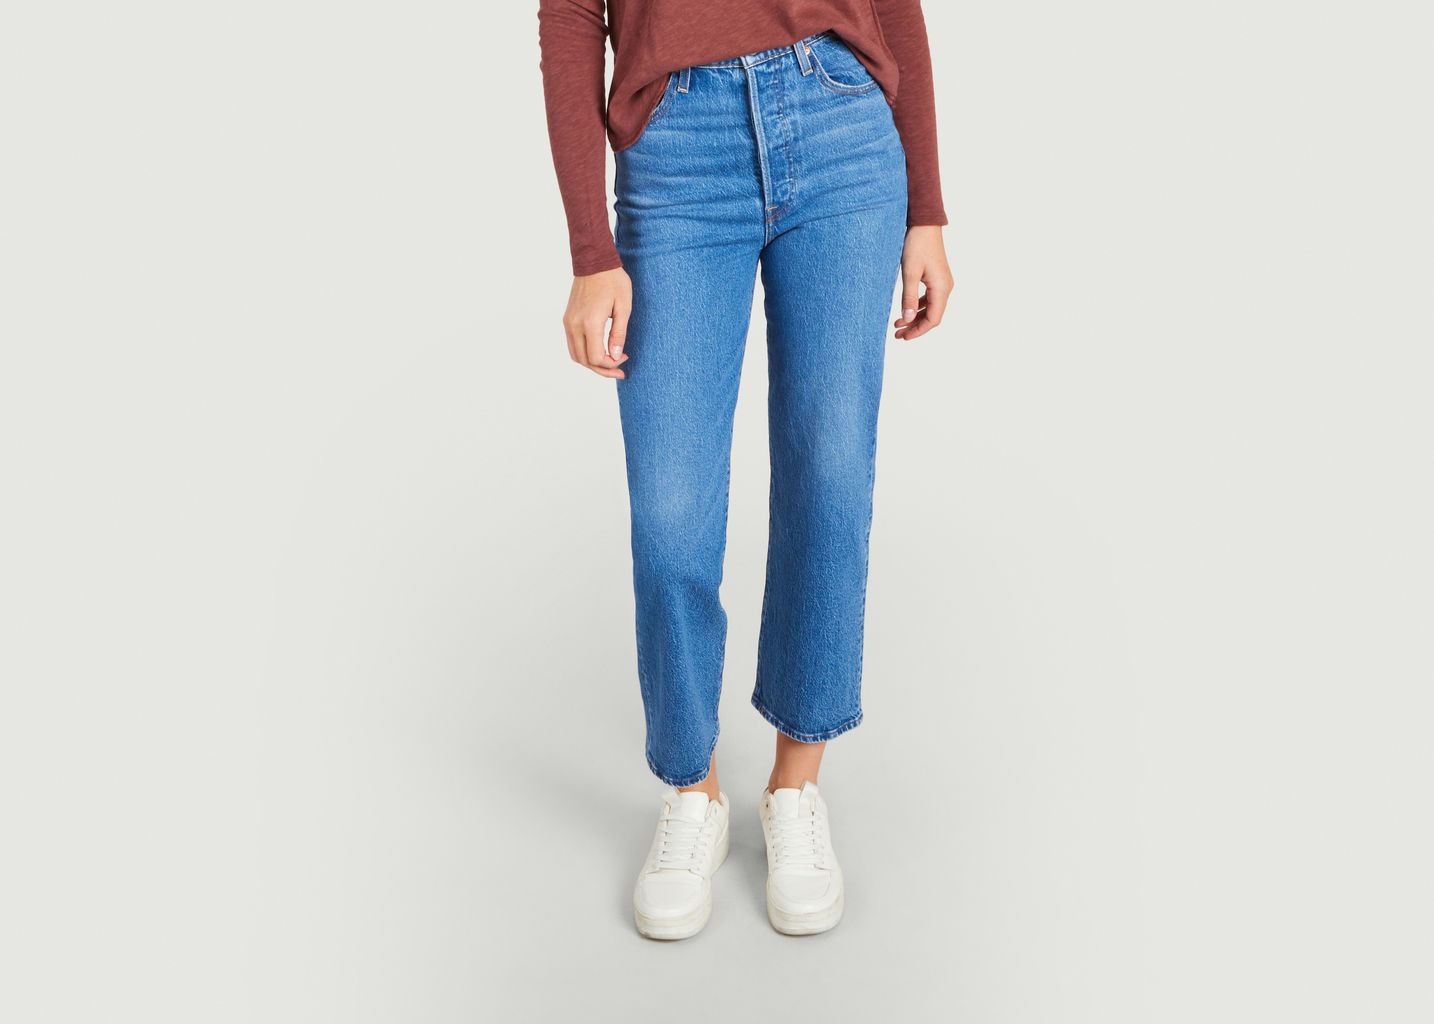 Ribcage Ankle straight jeans in cotton and elastane Denim Levi's Red Tab |  L'Exception